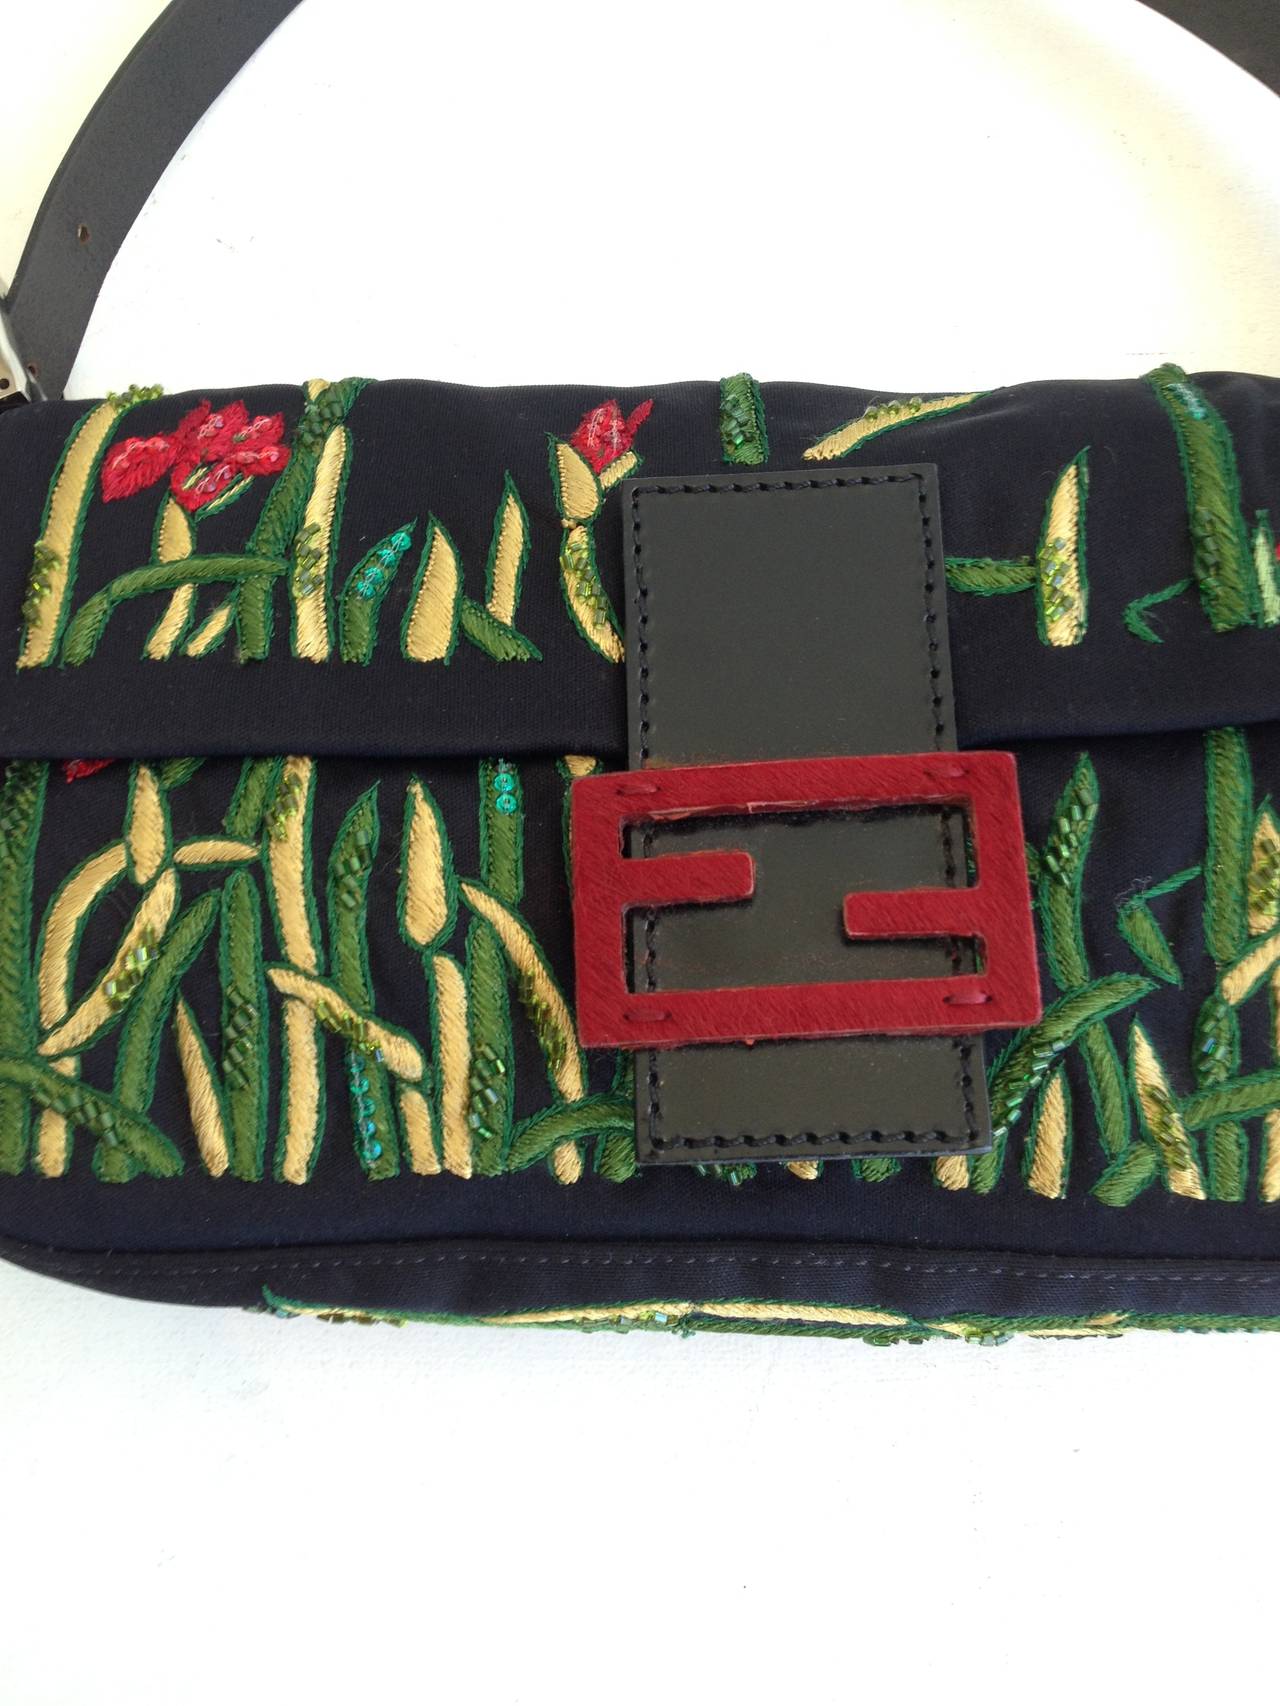 Welcome to the garden of Fendi. Their signature baguette bag is decorated for evening with a dark foliage and flowers - embroidered and sequined spring greens and yellows climb up the sides of the black fabric, with red blossoms to match the red